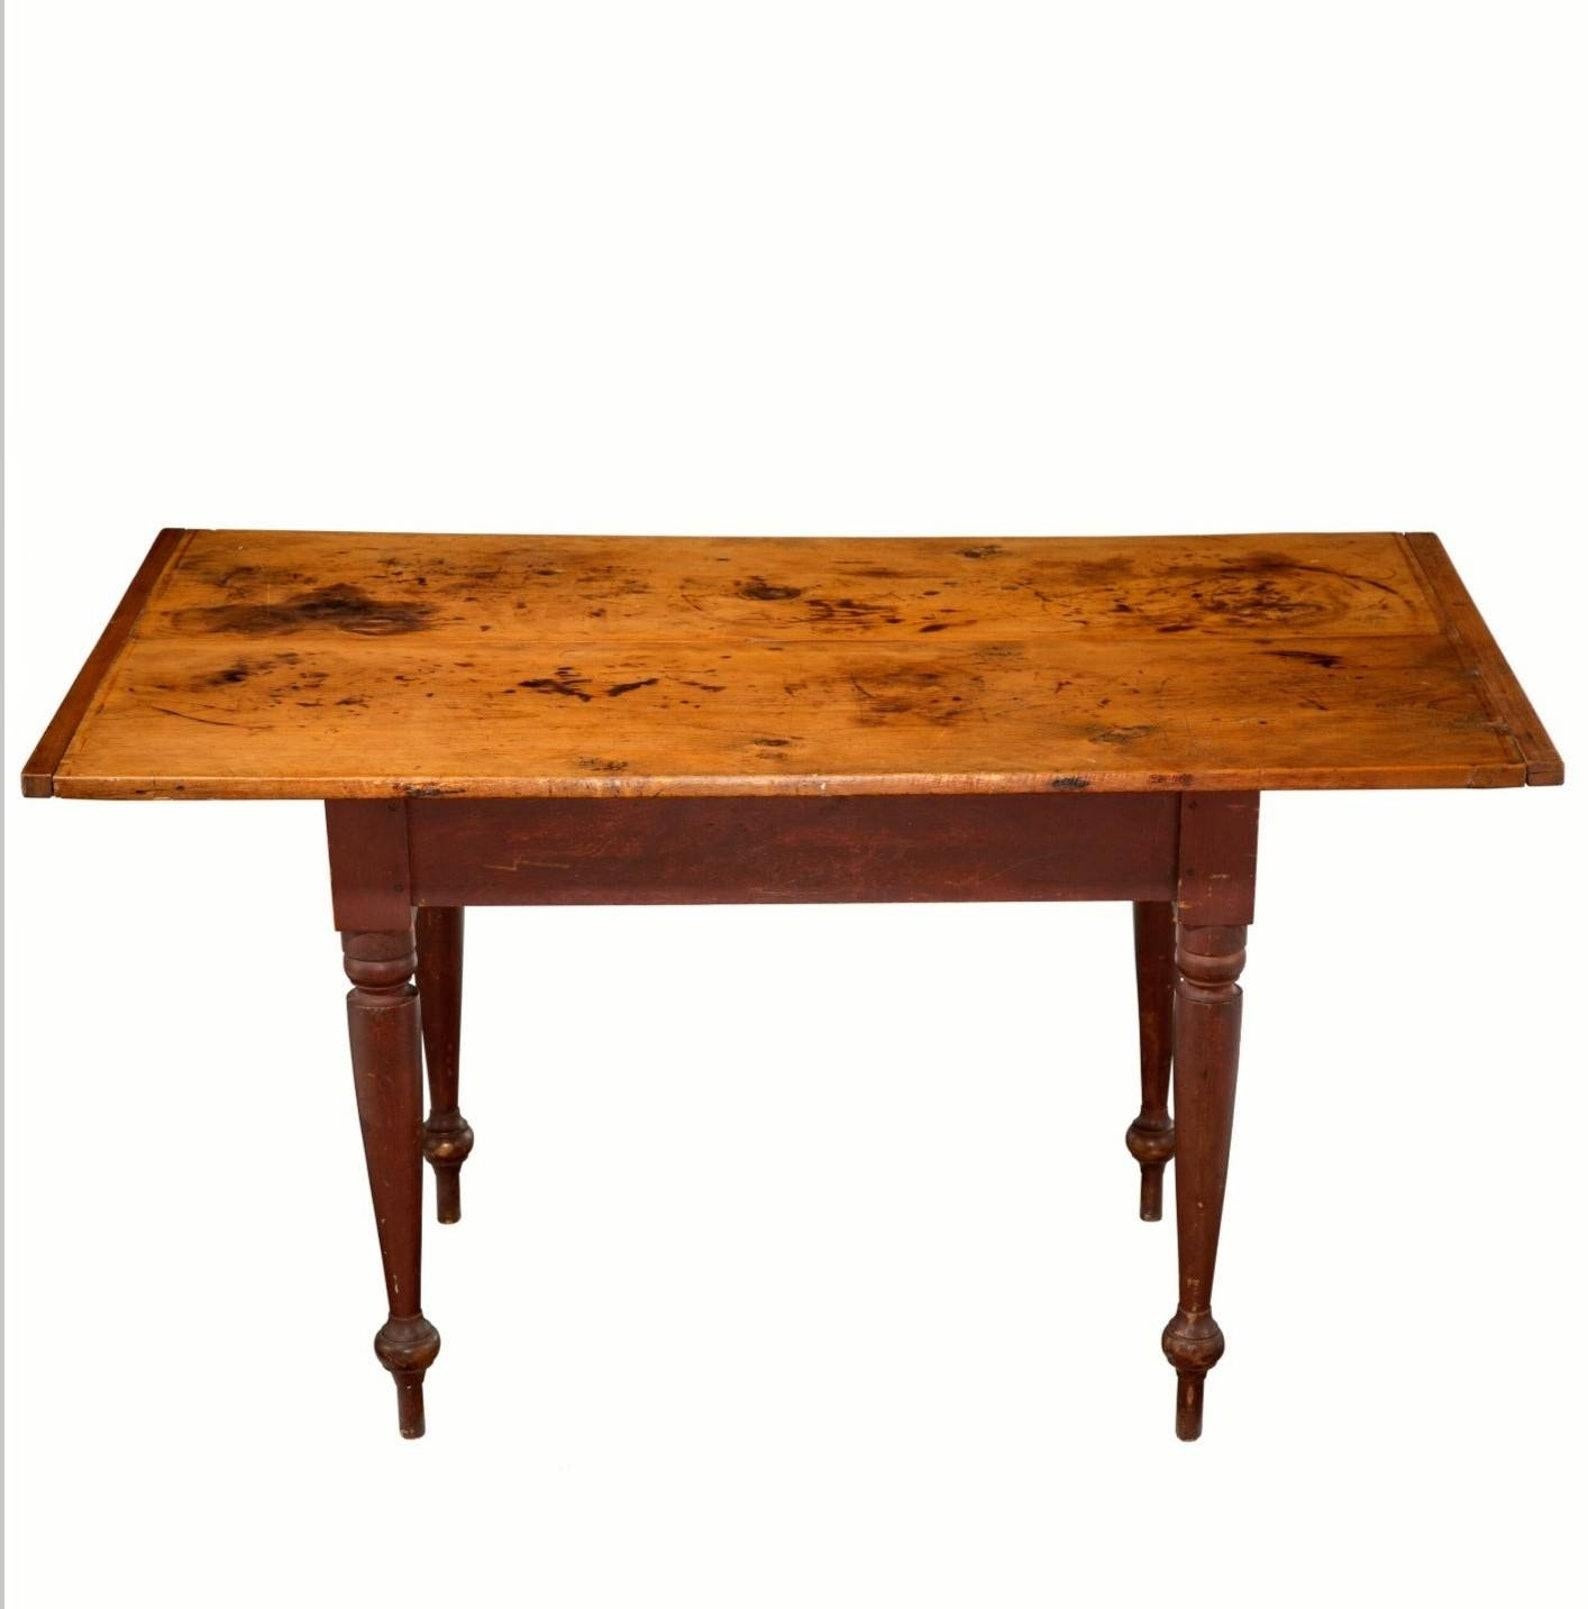 Early 19th Century American Farmhouse Harvest Work Table In Good Condition For Sale In Forney, TX